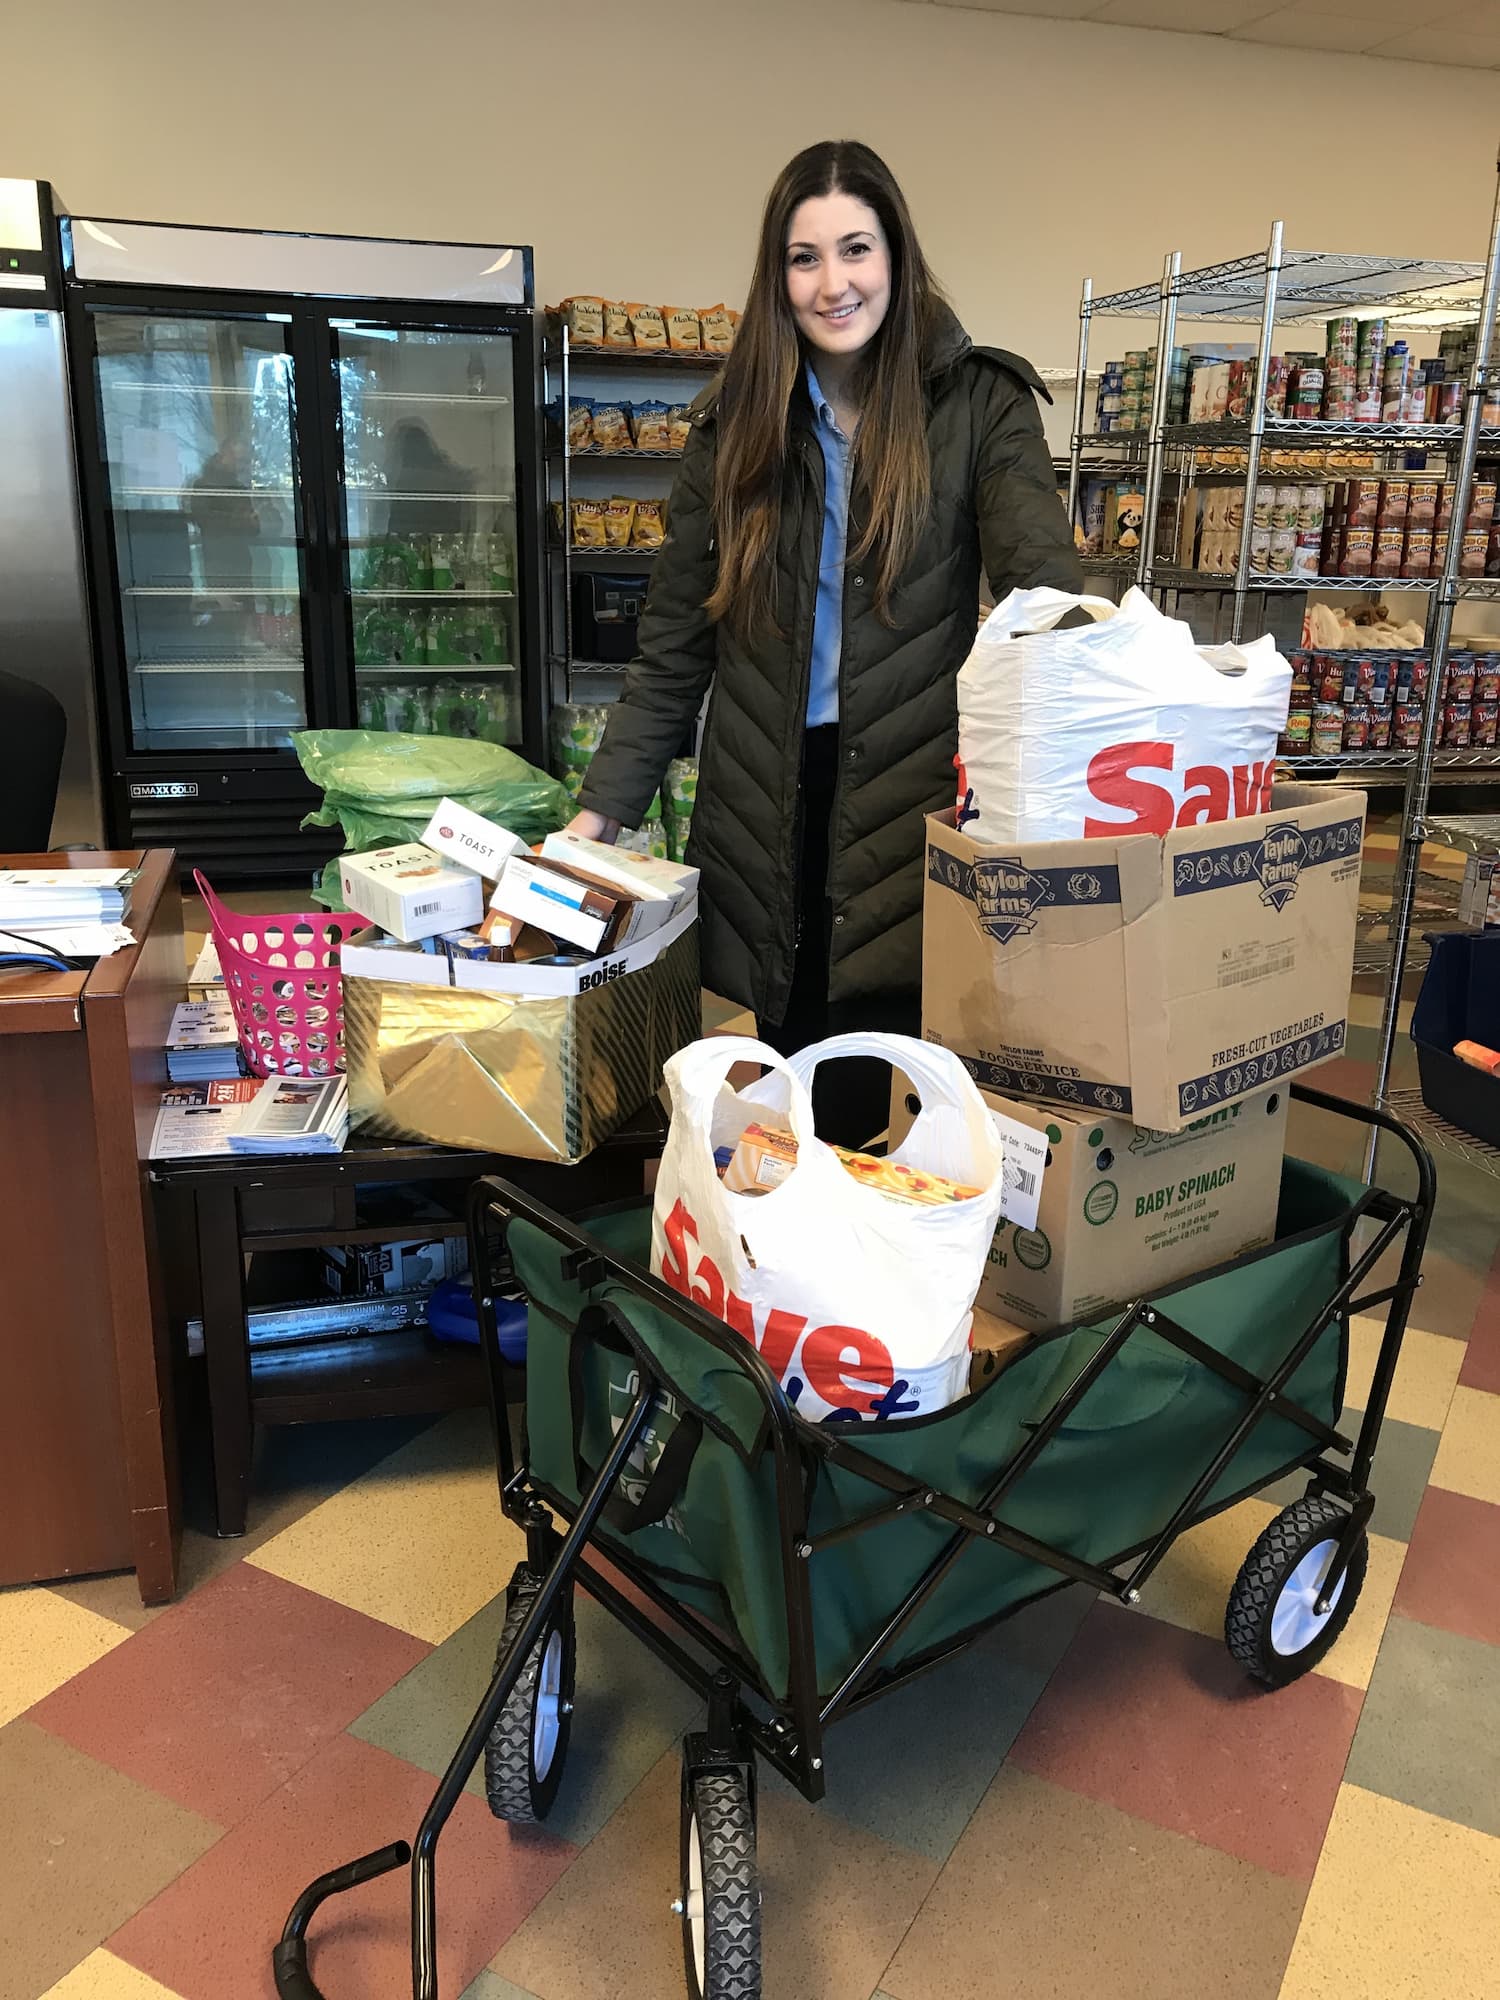 CLAS students provide solution for excess food waste